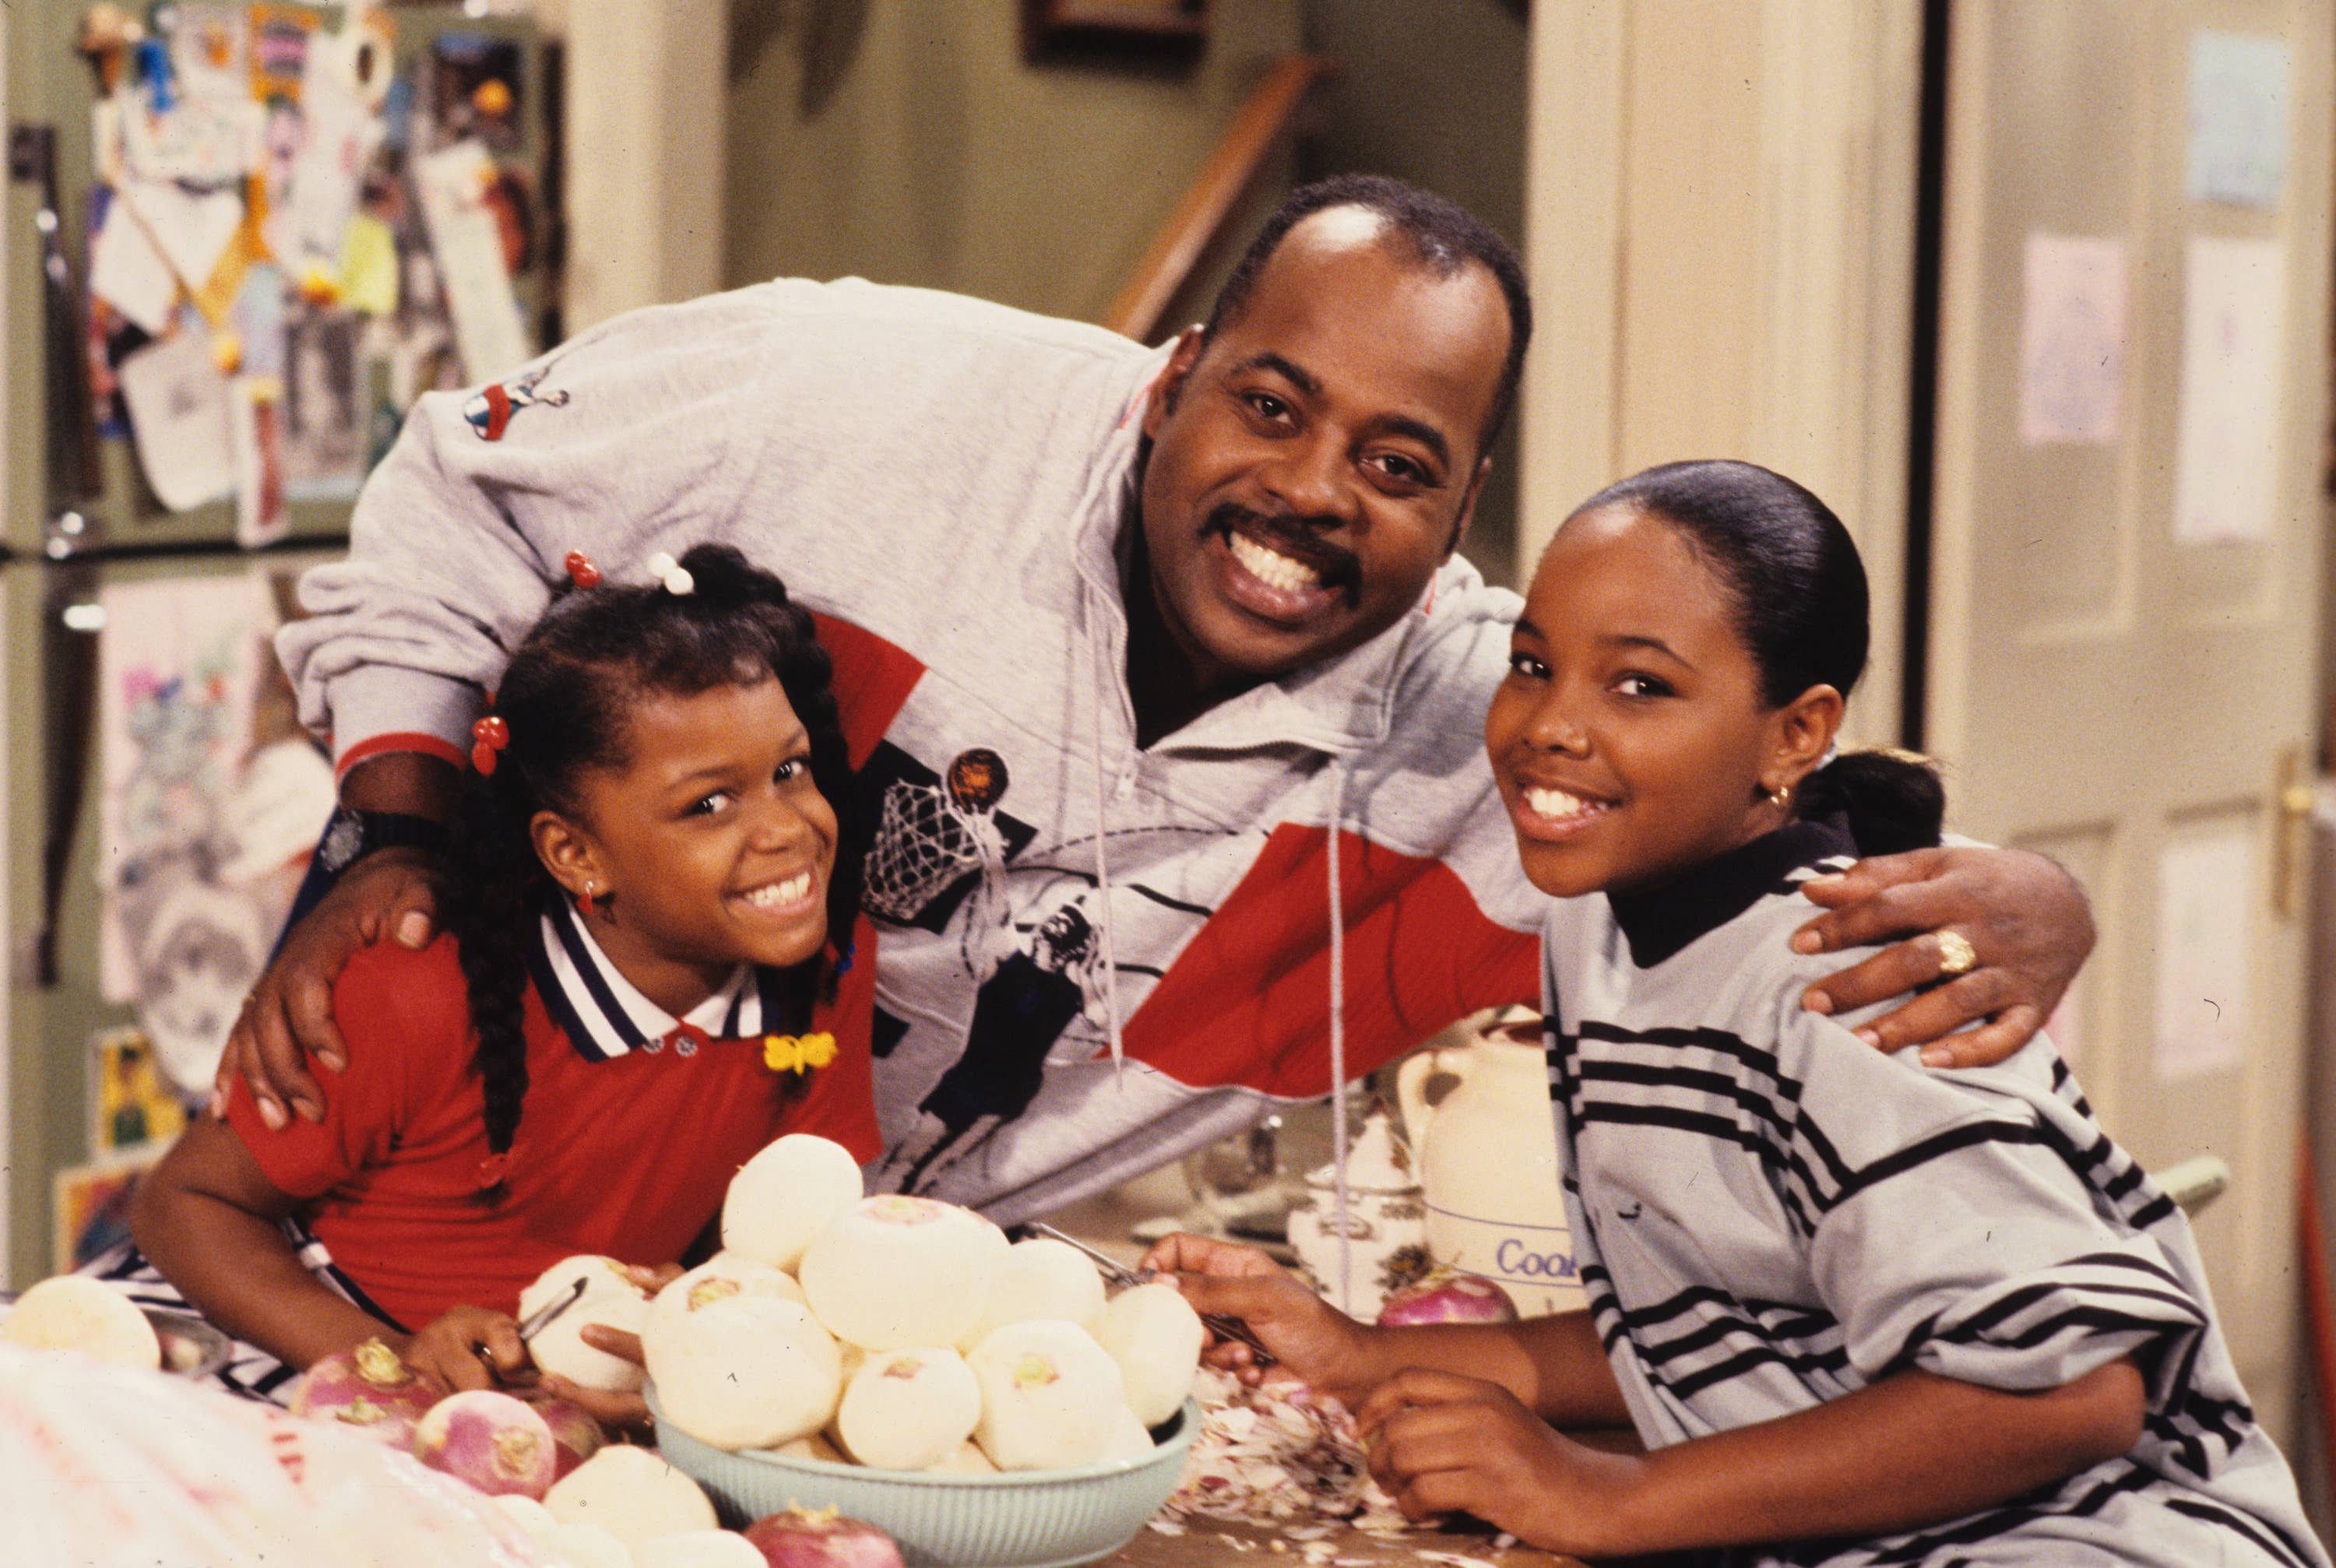 Why The First Actress Who Played “Claire” On 'My Wife & Kids' Was Replaced